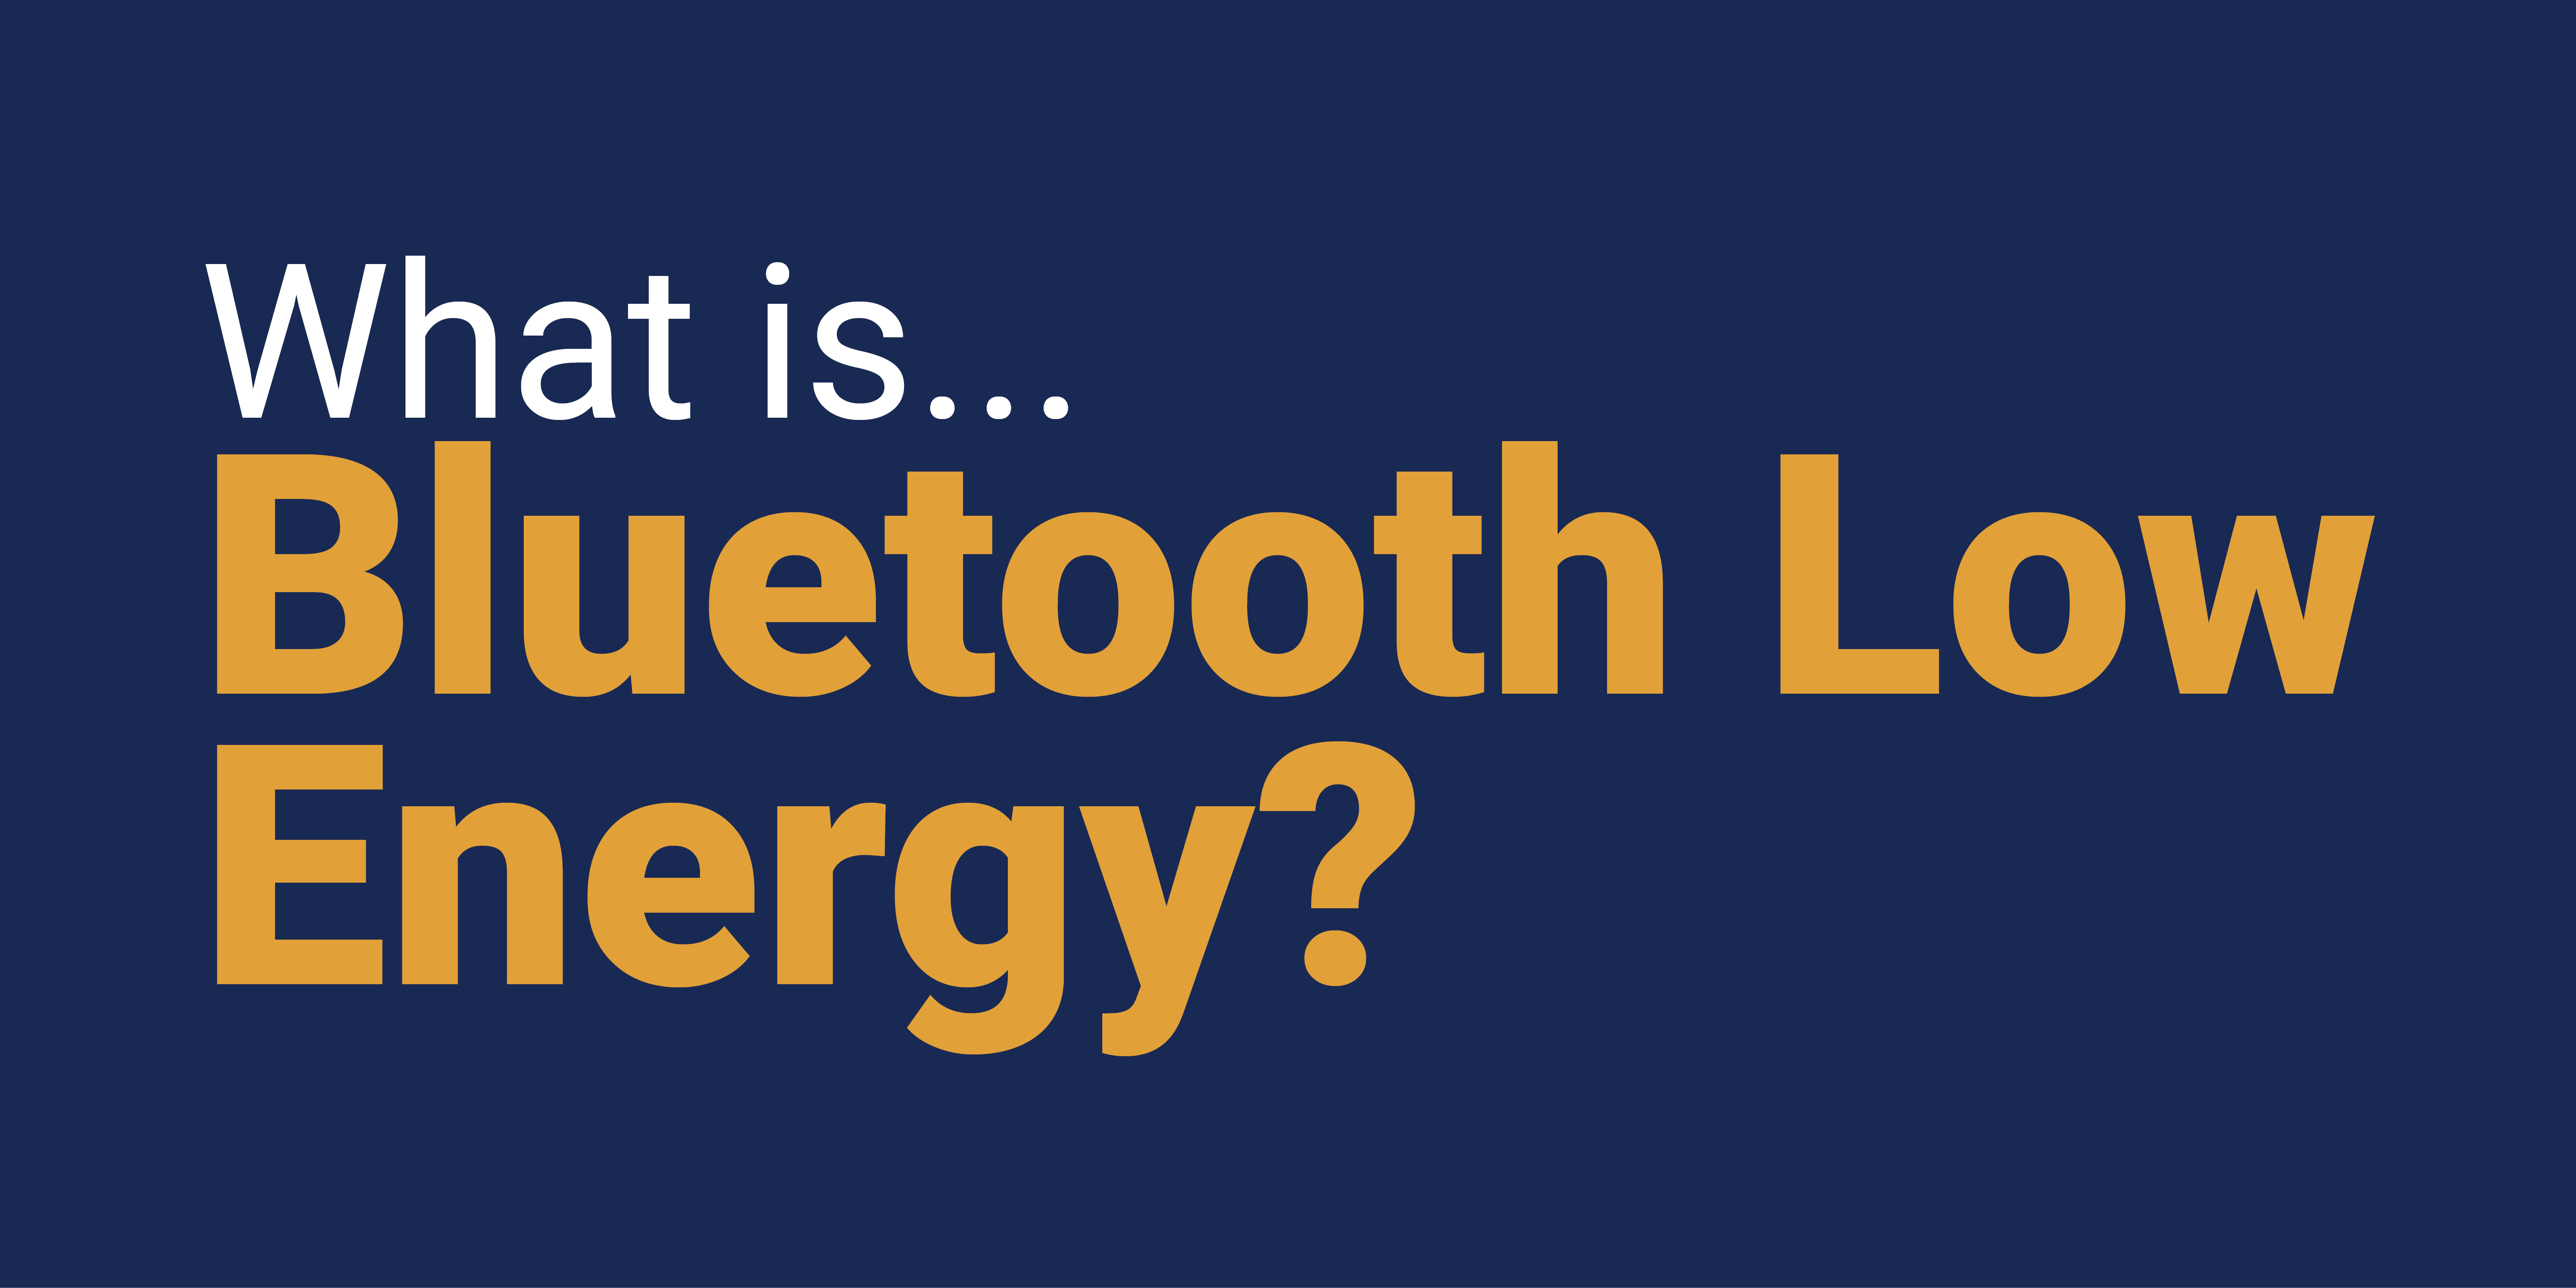 What is Bluetooth Low Energy?